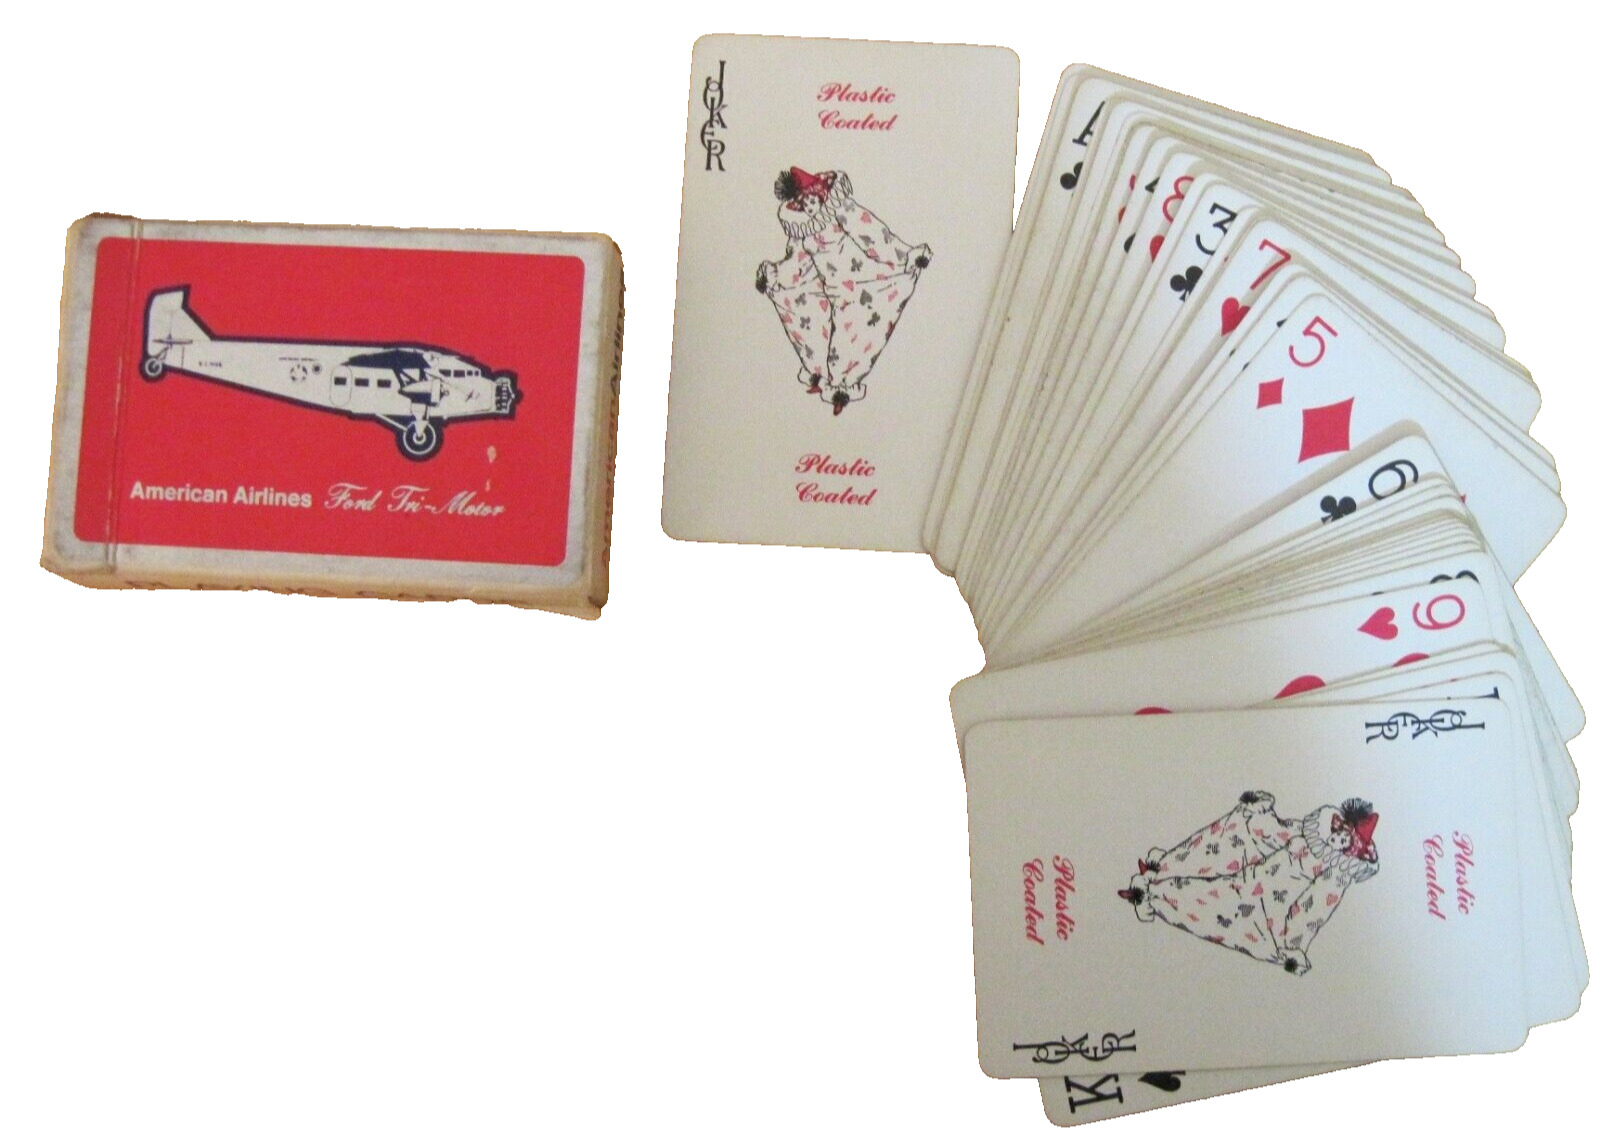 AMERICAN AIRLINES-Vintage Playing Cards-FORD TRI-MOTOR Aviation-Plastic Coated